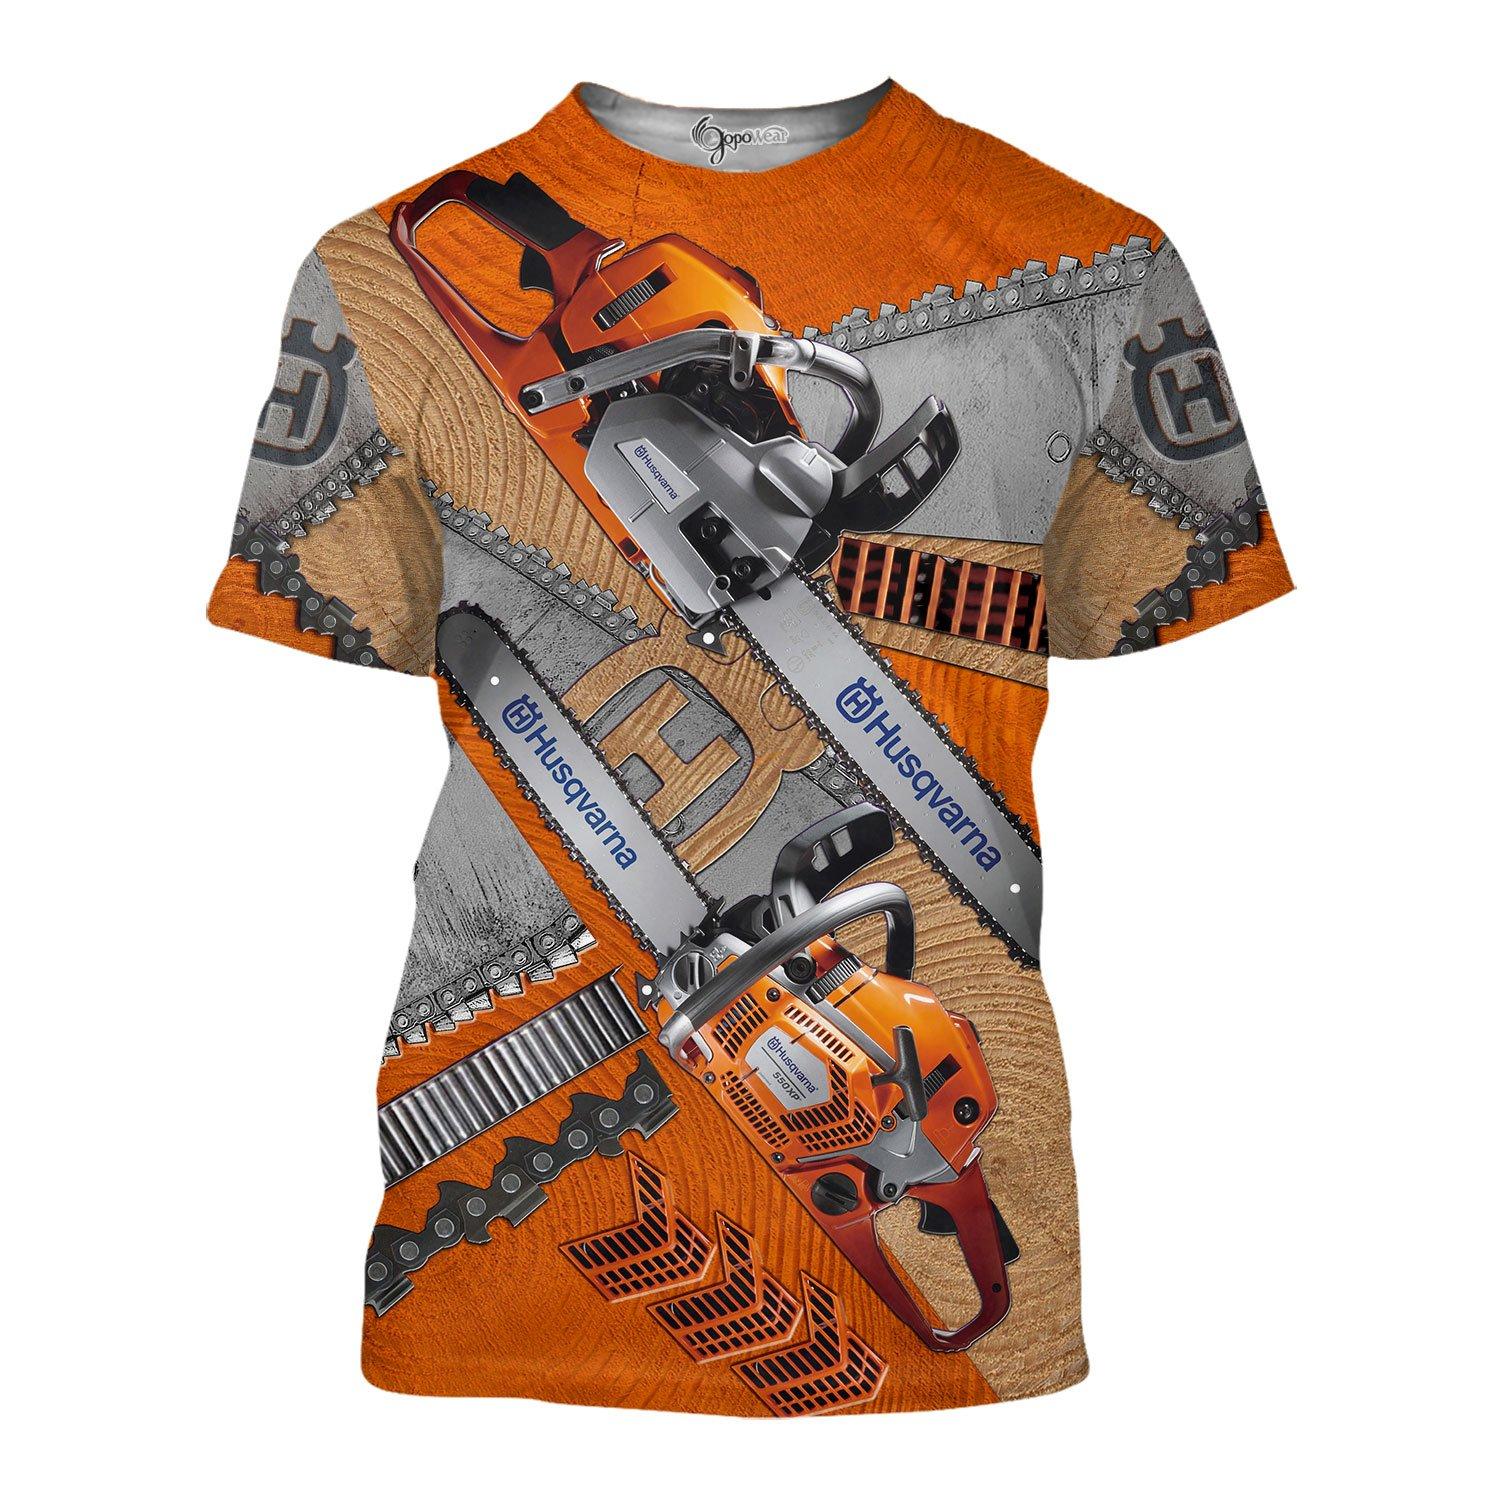 Husqvarna chainsaw 3d all over printed t-shirt